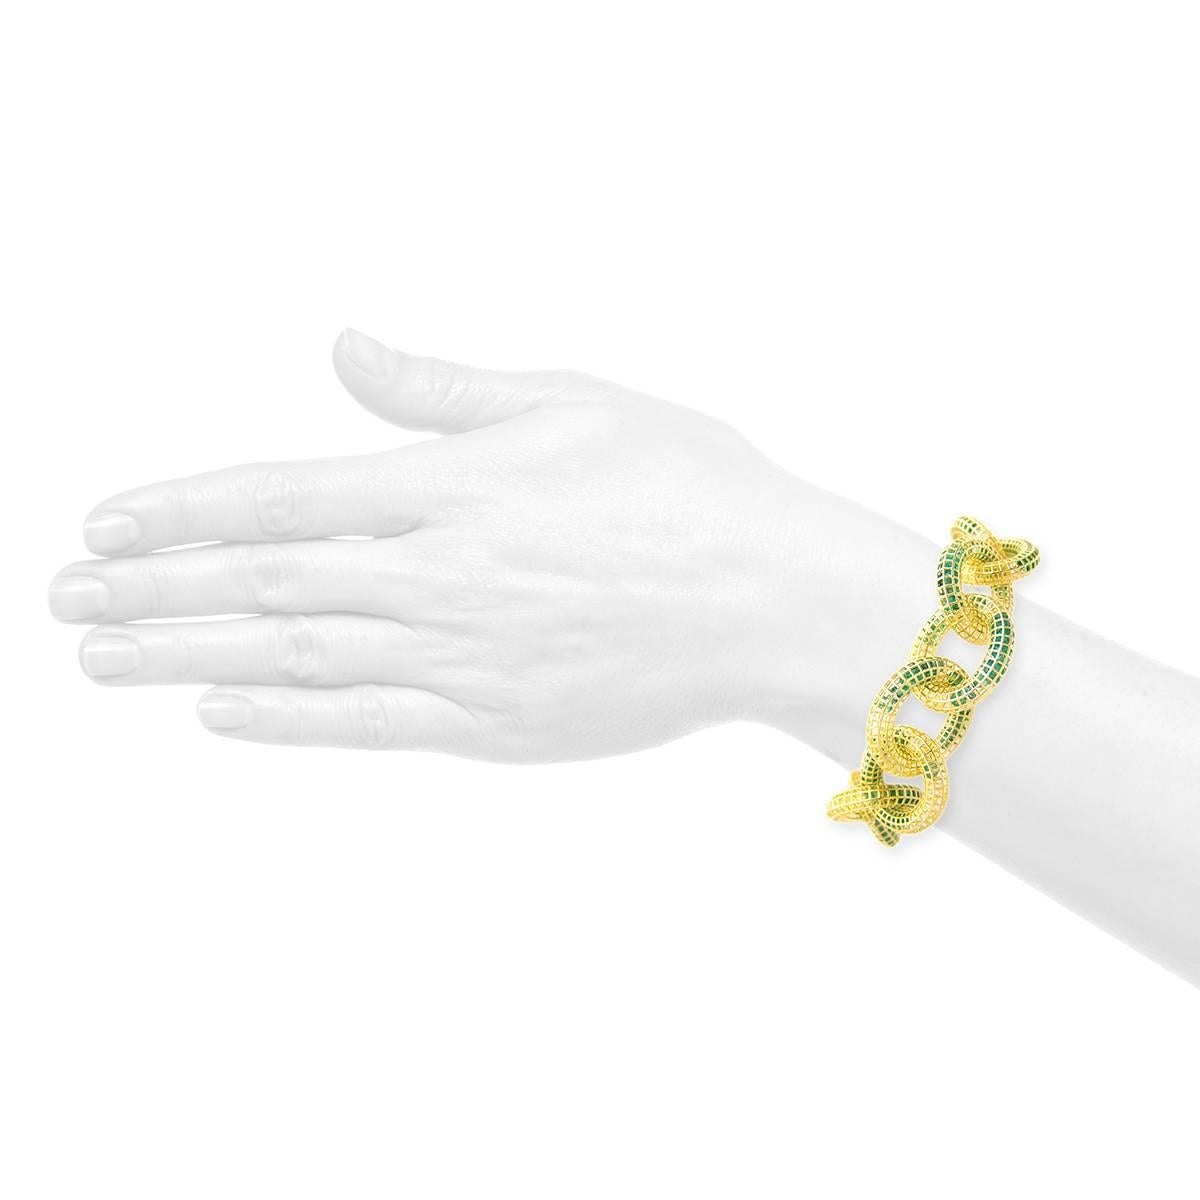 From the Wired Collection, a chainlink bracelet in 18k yellow gold with 42 cts of loose emeralds and flush-set emerald baguettes (0.41 ct). Bright satin finish with polished highlights. V-lock closure. Square grid pattern.
     Bracelet has 7-1/2”